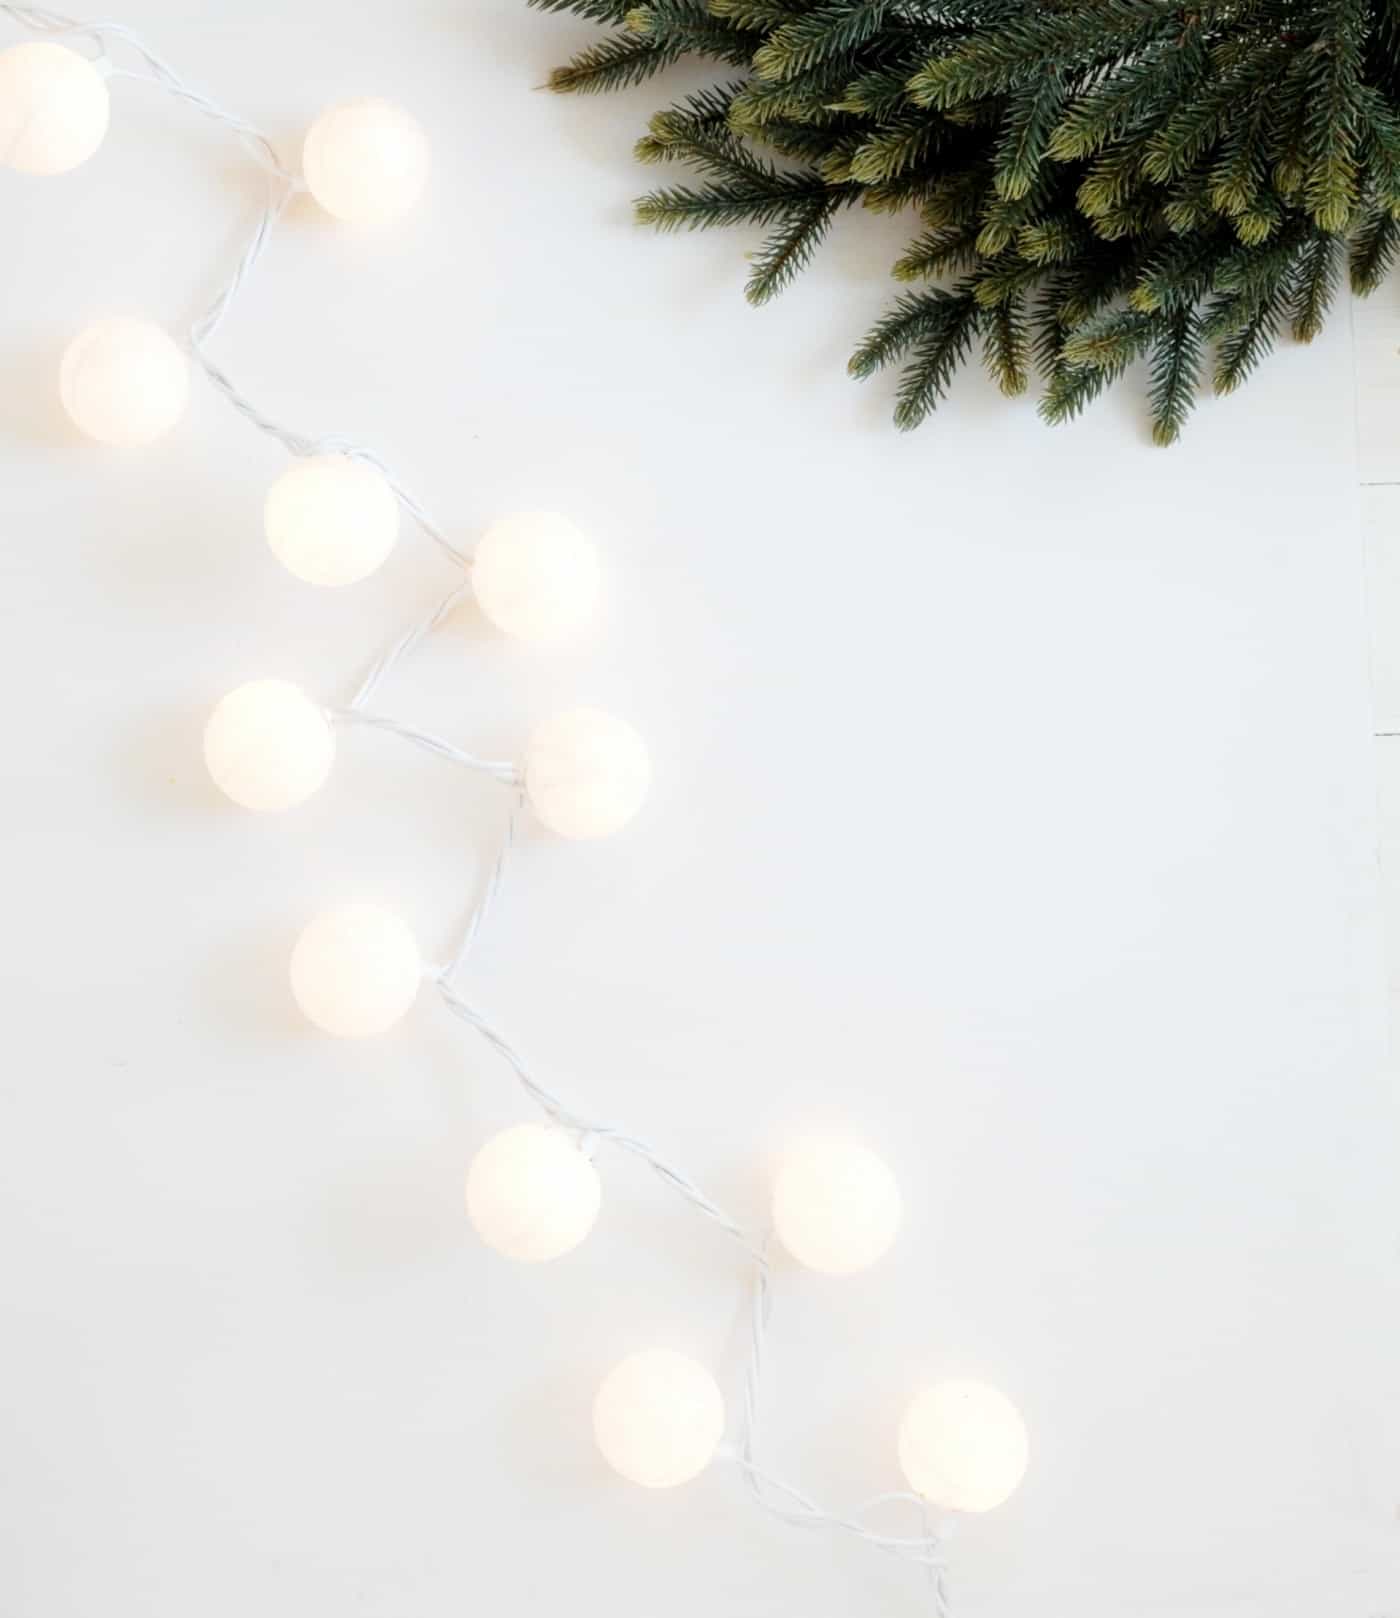 Are you ready to start decorating for Christmas yet? These DIY Christmas lights are easy to make and look like you have glittery snowballs decorating your home!